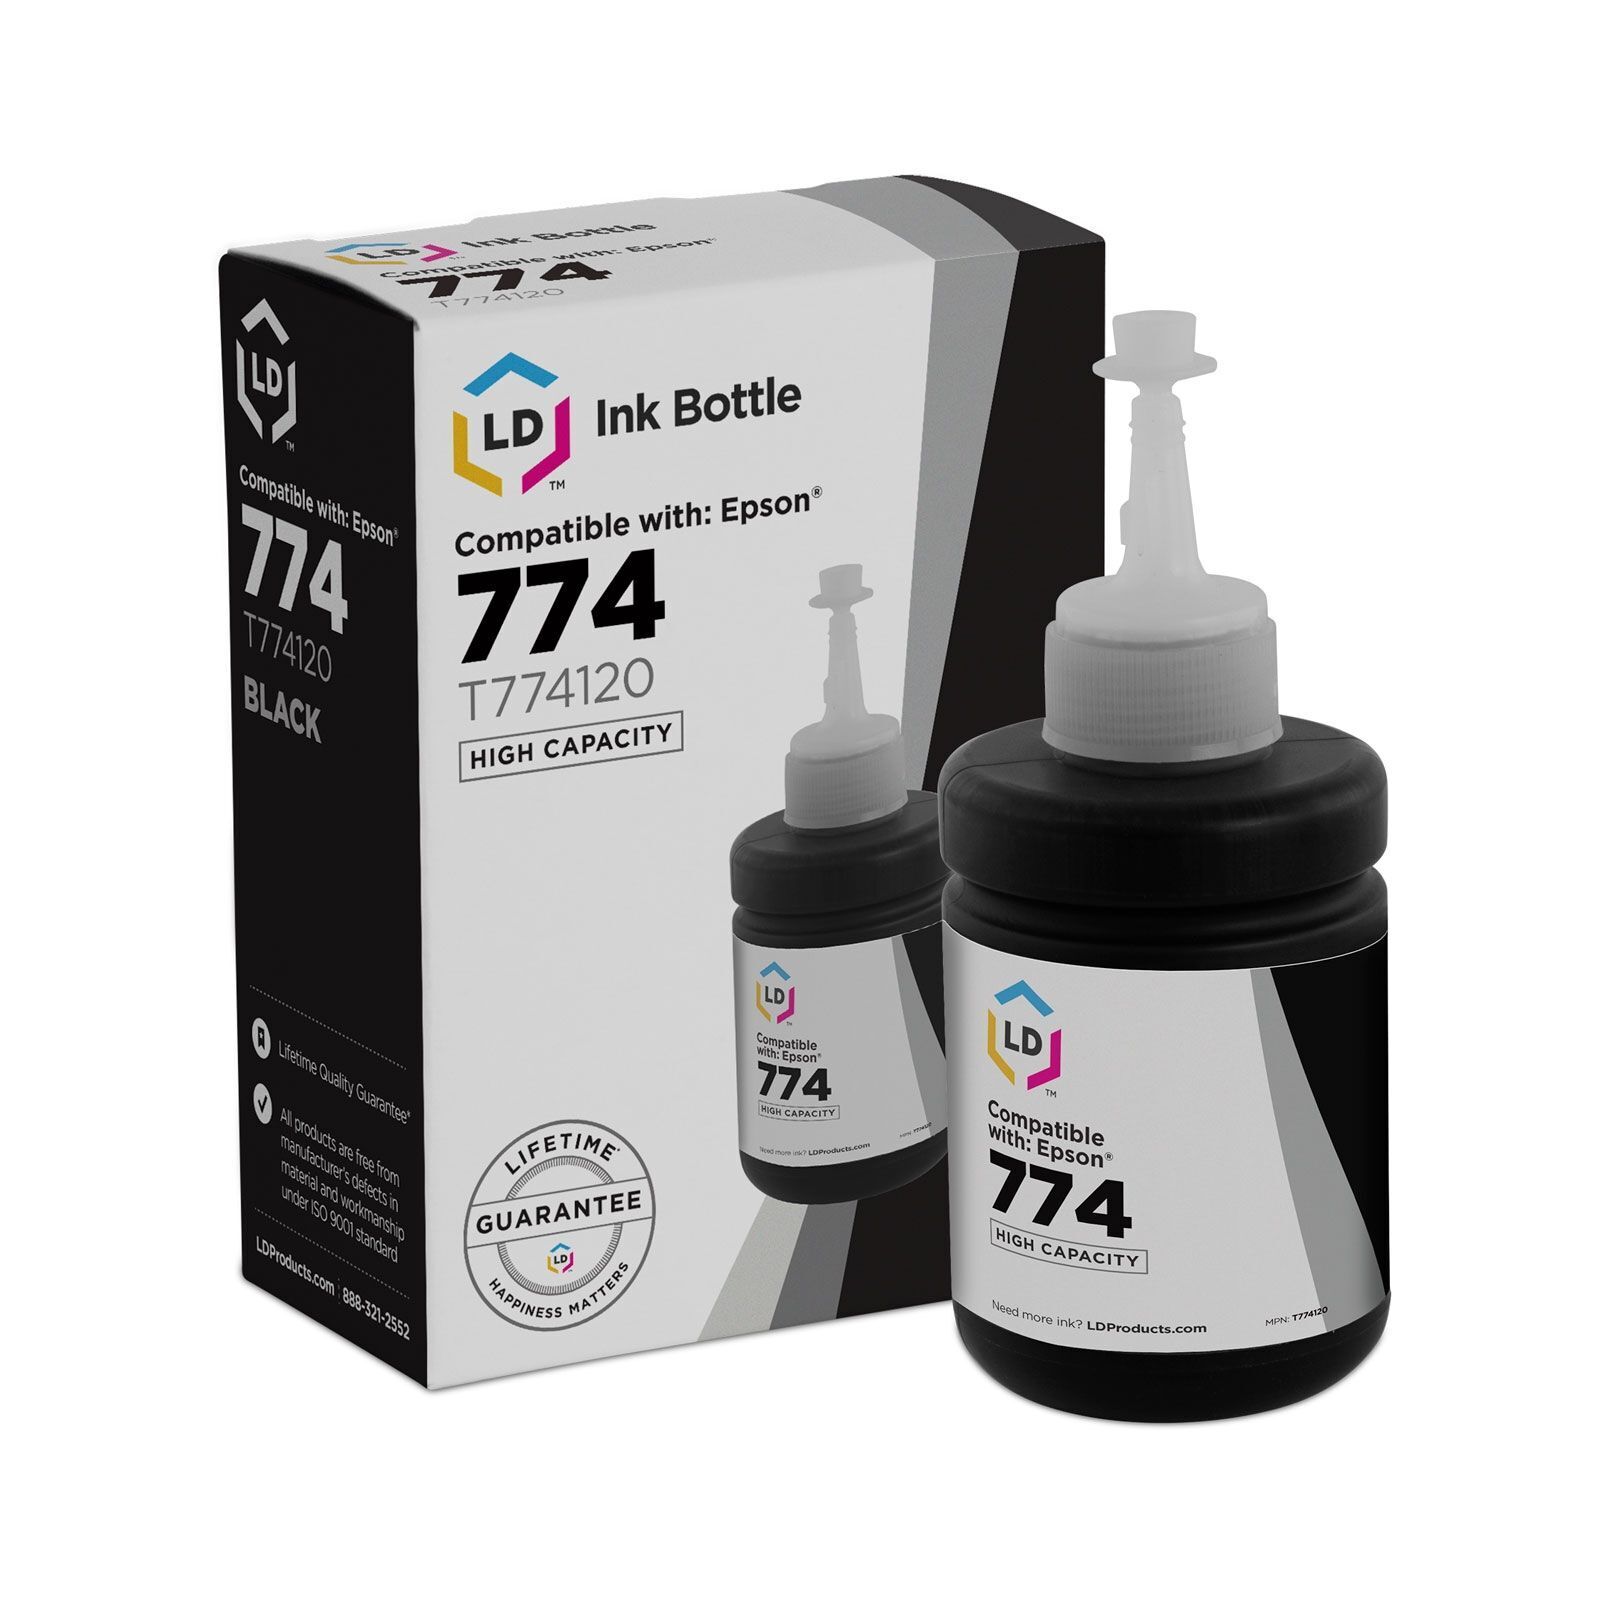 LD Compatible High Capacity Black Ink Bottle for Epson 774 (T774120)